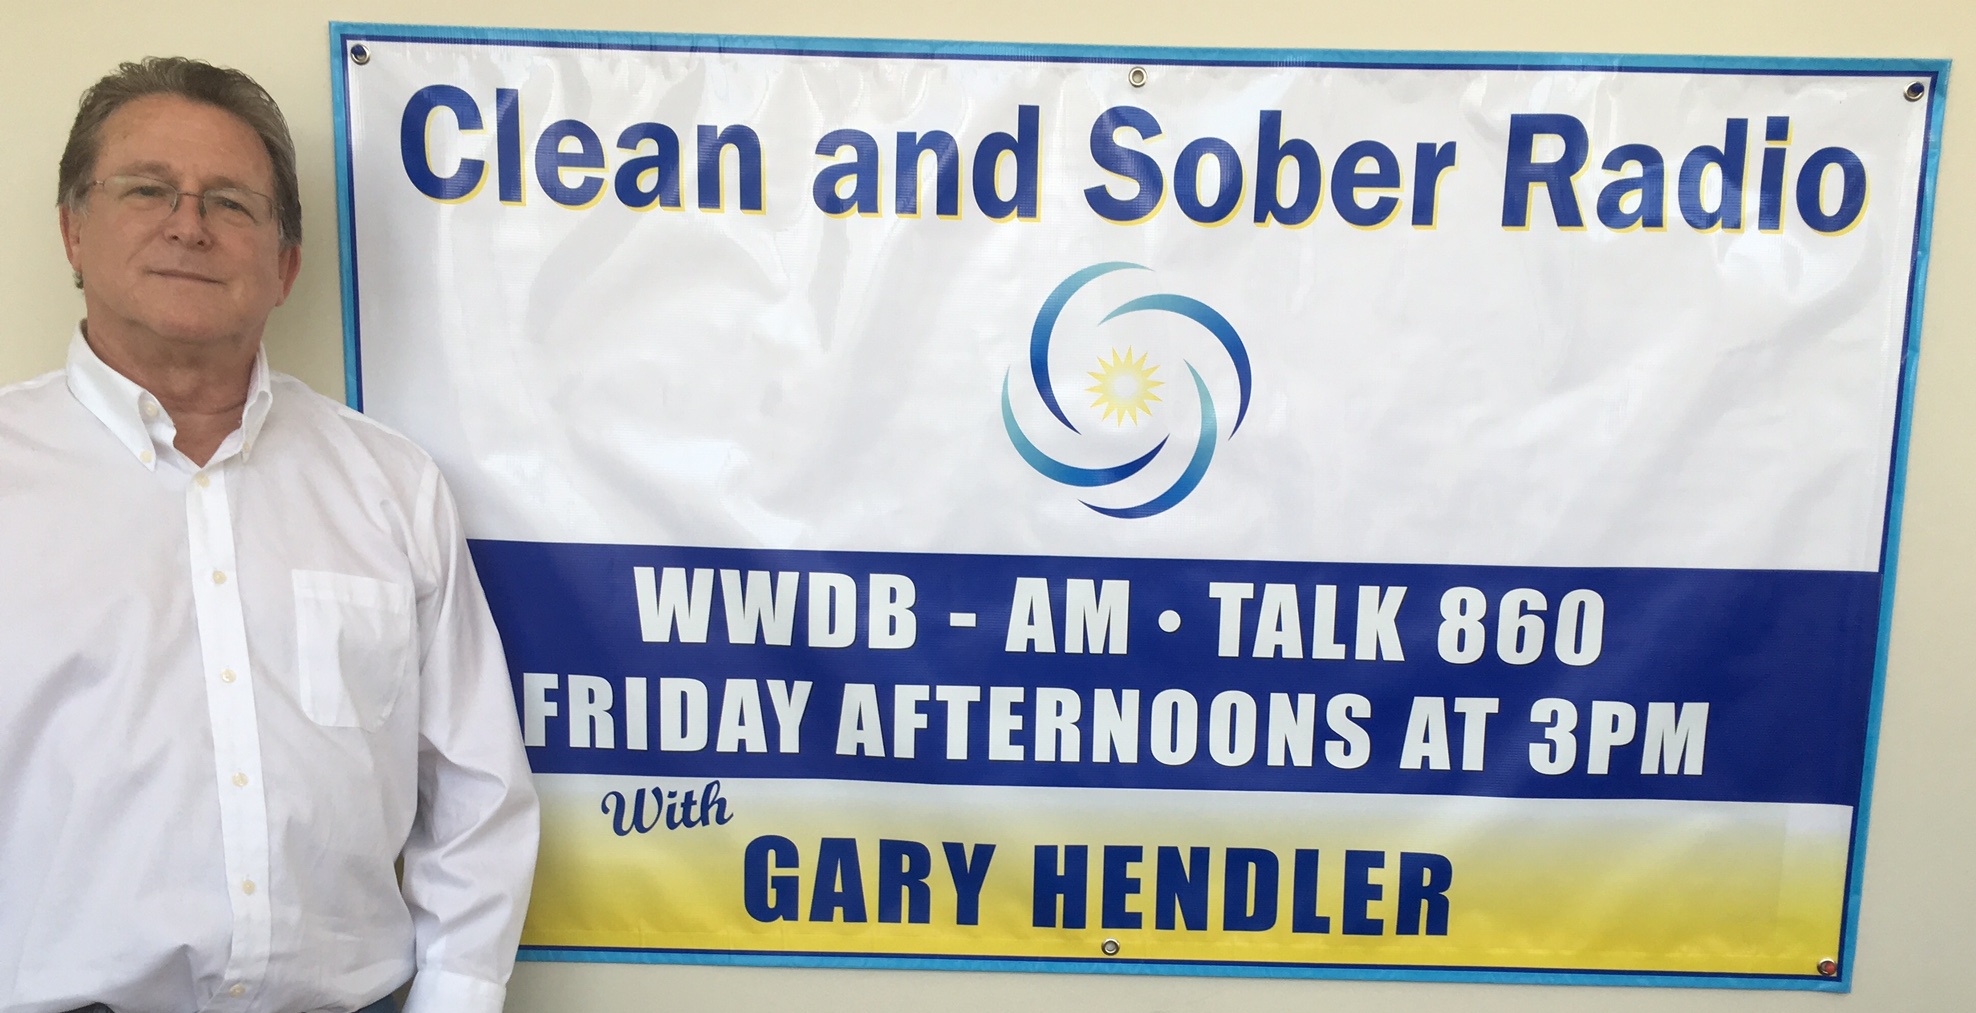 Gary Hendler - host of Clean and Sober Radio